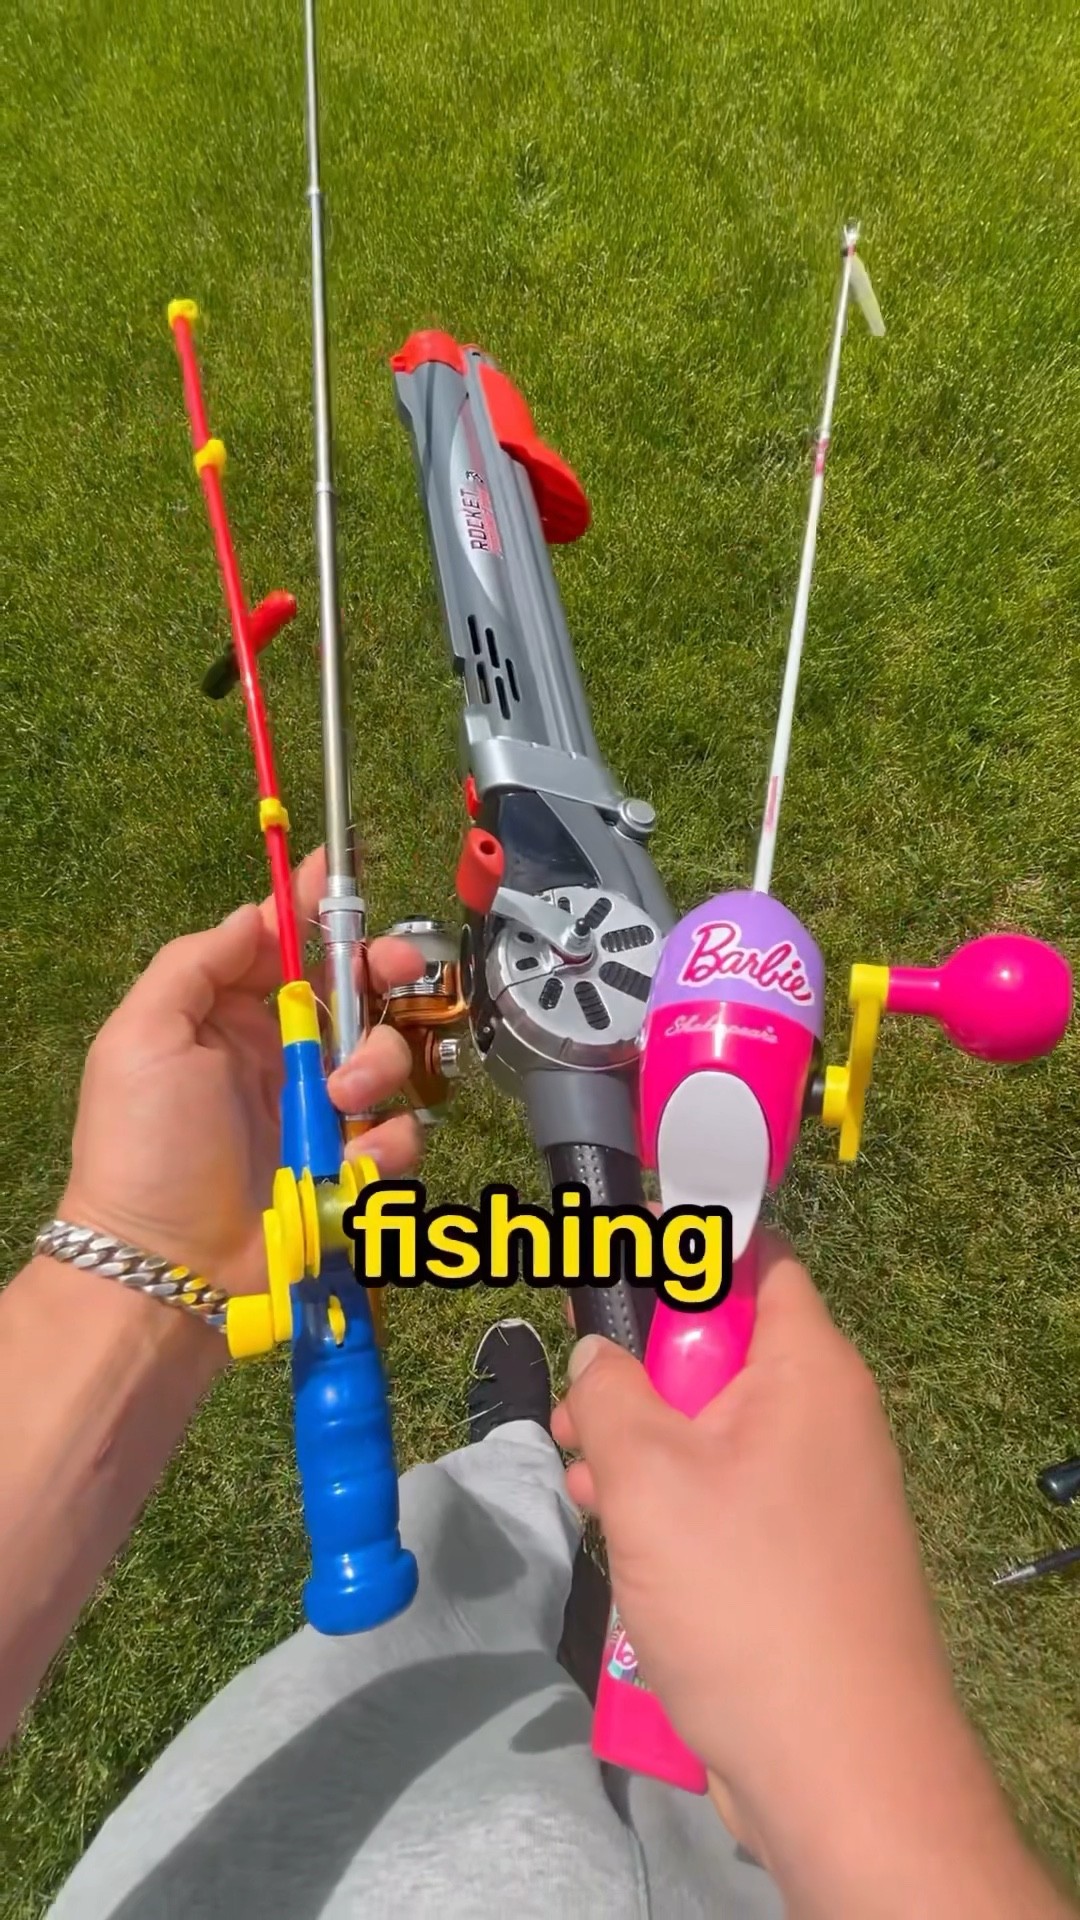 FISHING STORE CHALLENGE – What do we get for 2000sek at Olssons Fiske